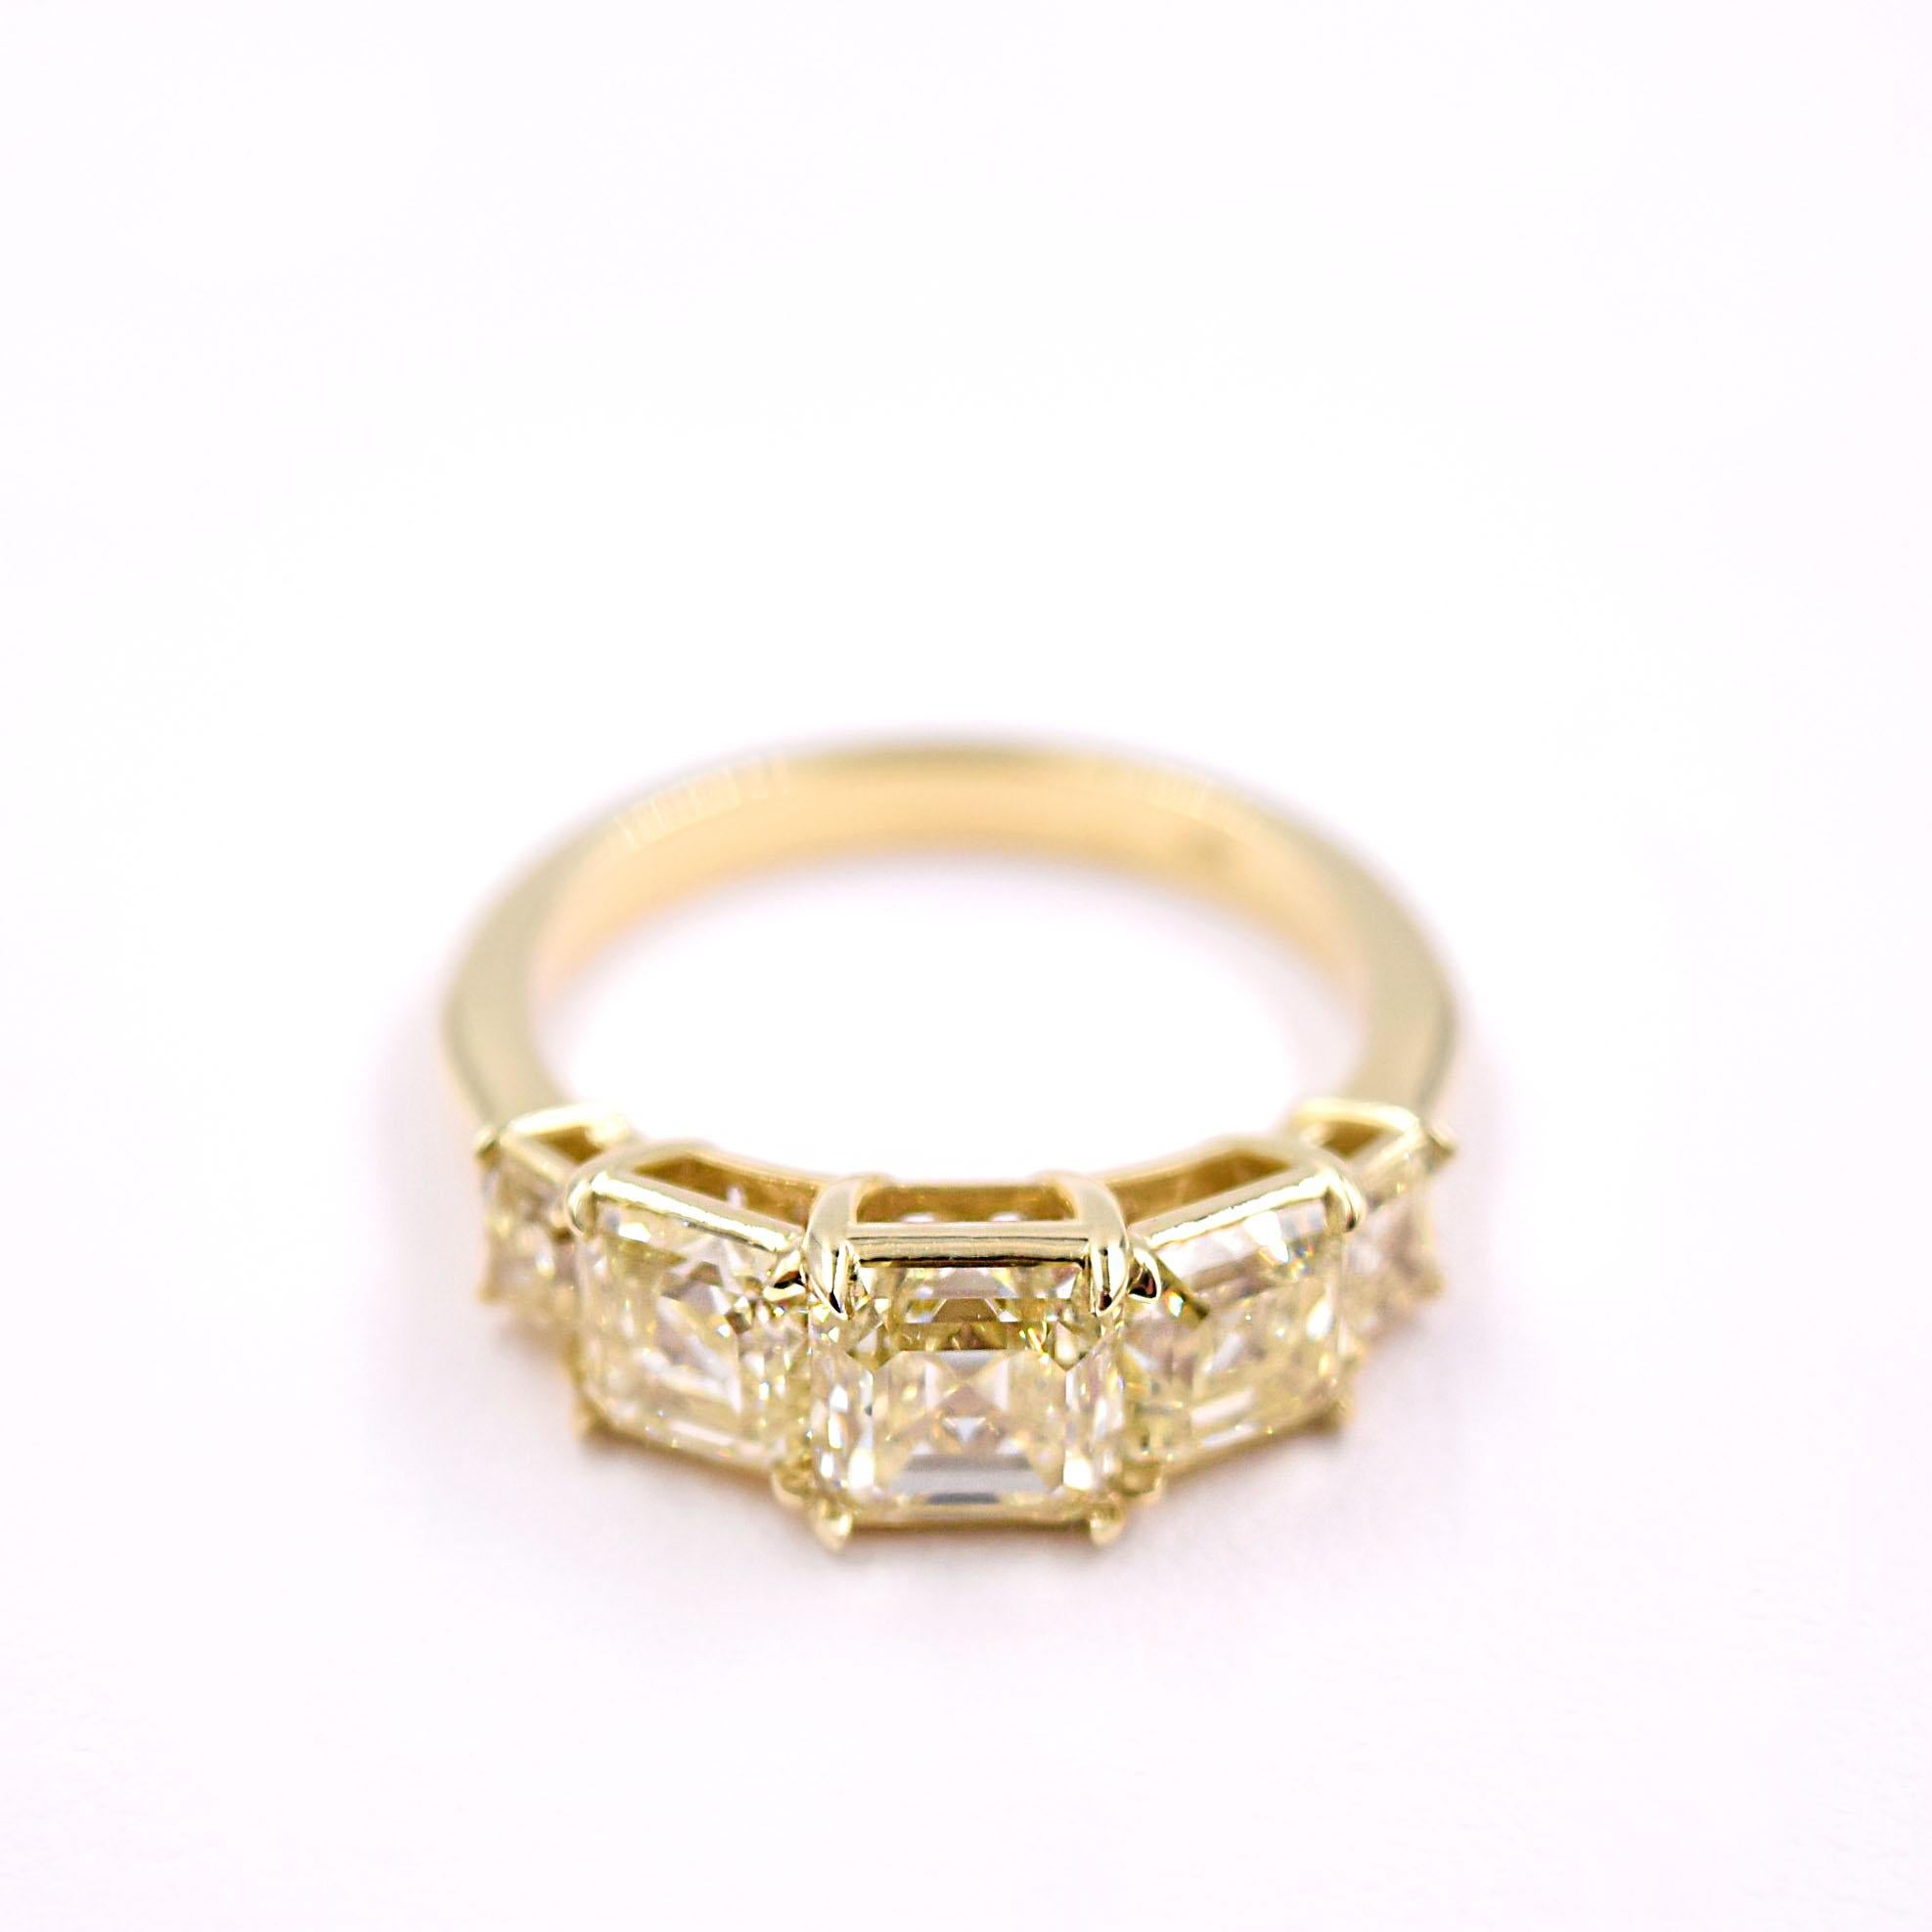 Fancy Light Yellow Diamond Band in Yellow Gold.
- GIA#6282372589 square emerald cut 1.54ct natural fancy light yellow VVS1 
- GIA#5286372314 square emerald cut 1.00ct natural fancy light yellow VS1
- GIA#6282372297 square emerald cut 1.00ct natural